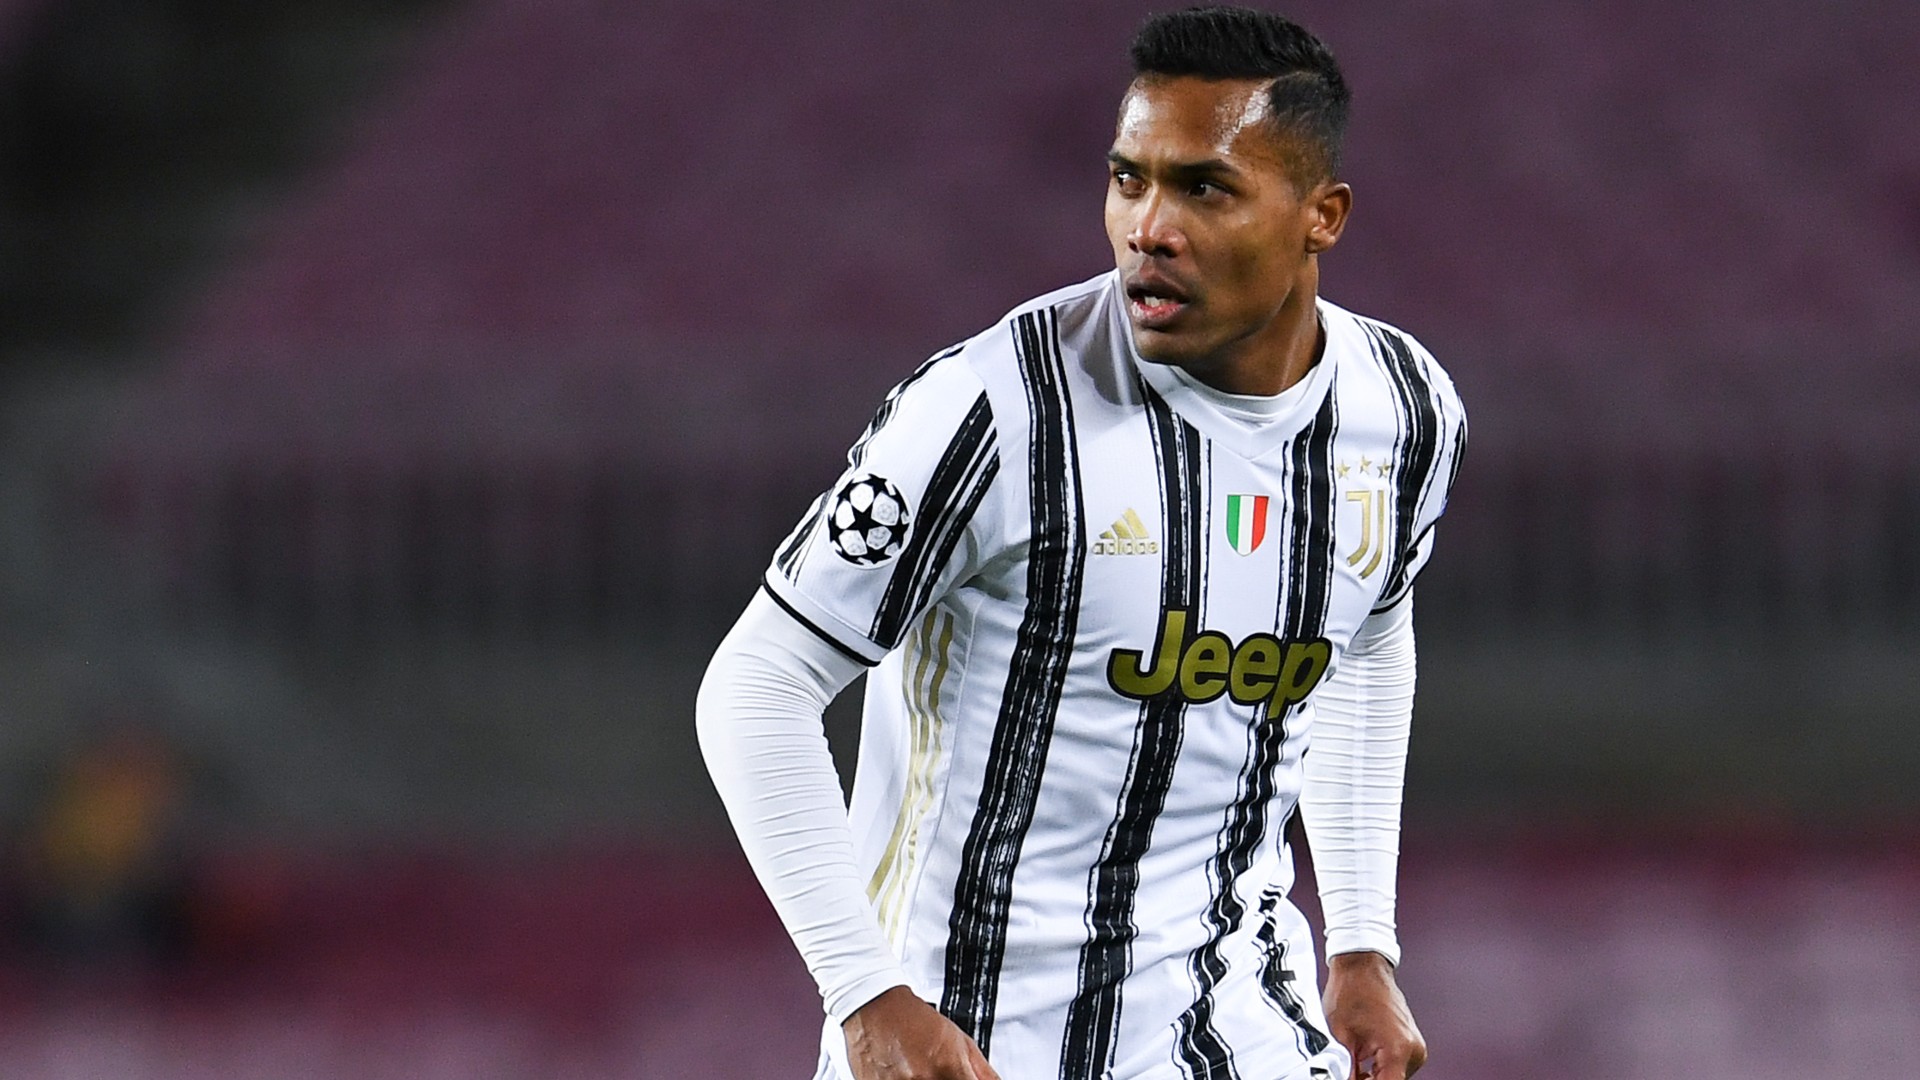 As Juventus prepare to face Portuguese giants Benfica within the Champions League this evening, full-back Alex Sandro spoke about the importance of the fixture within the media.